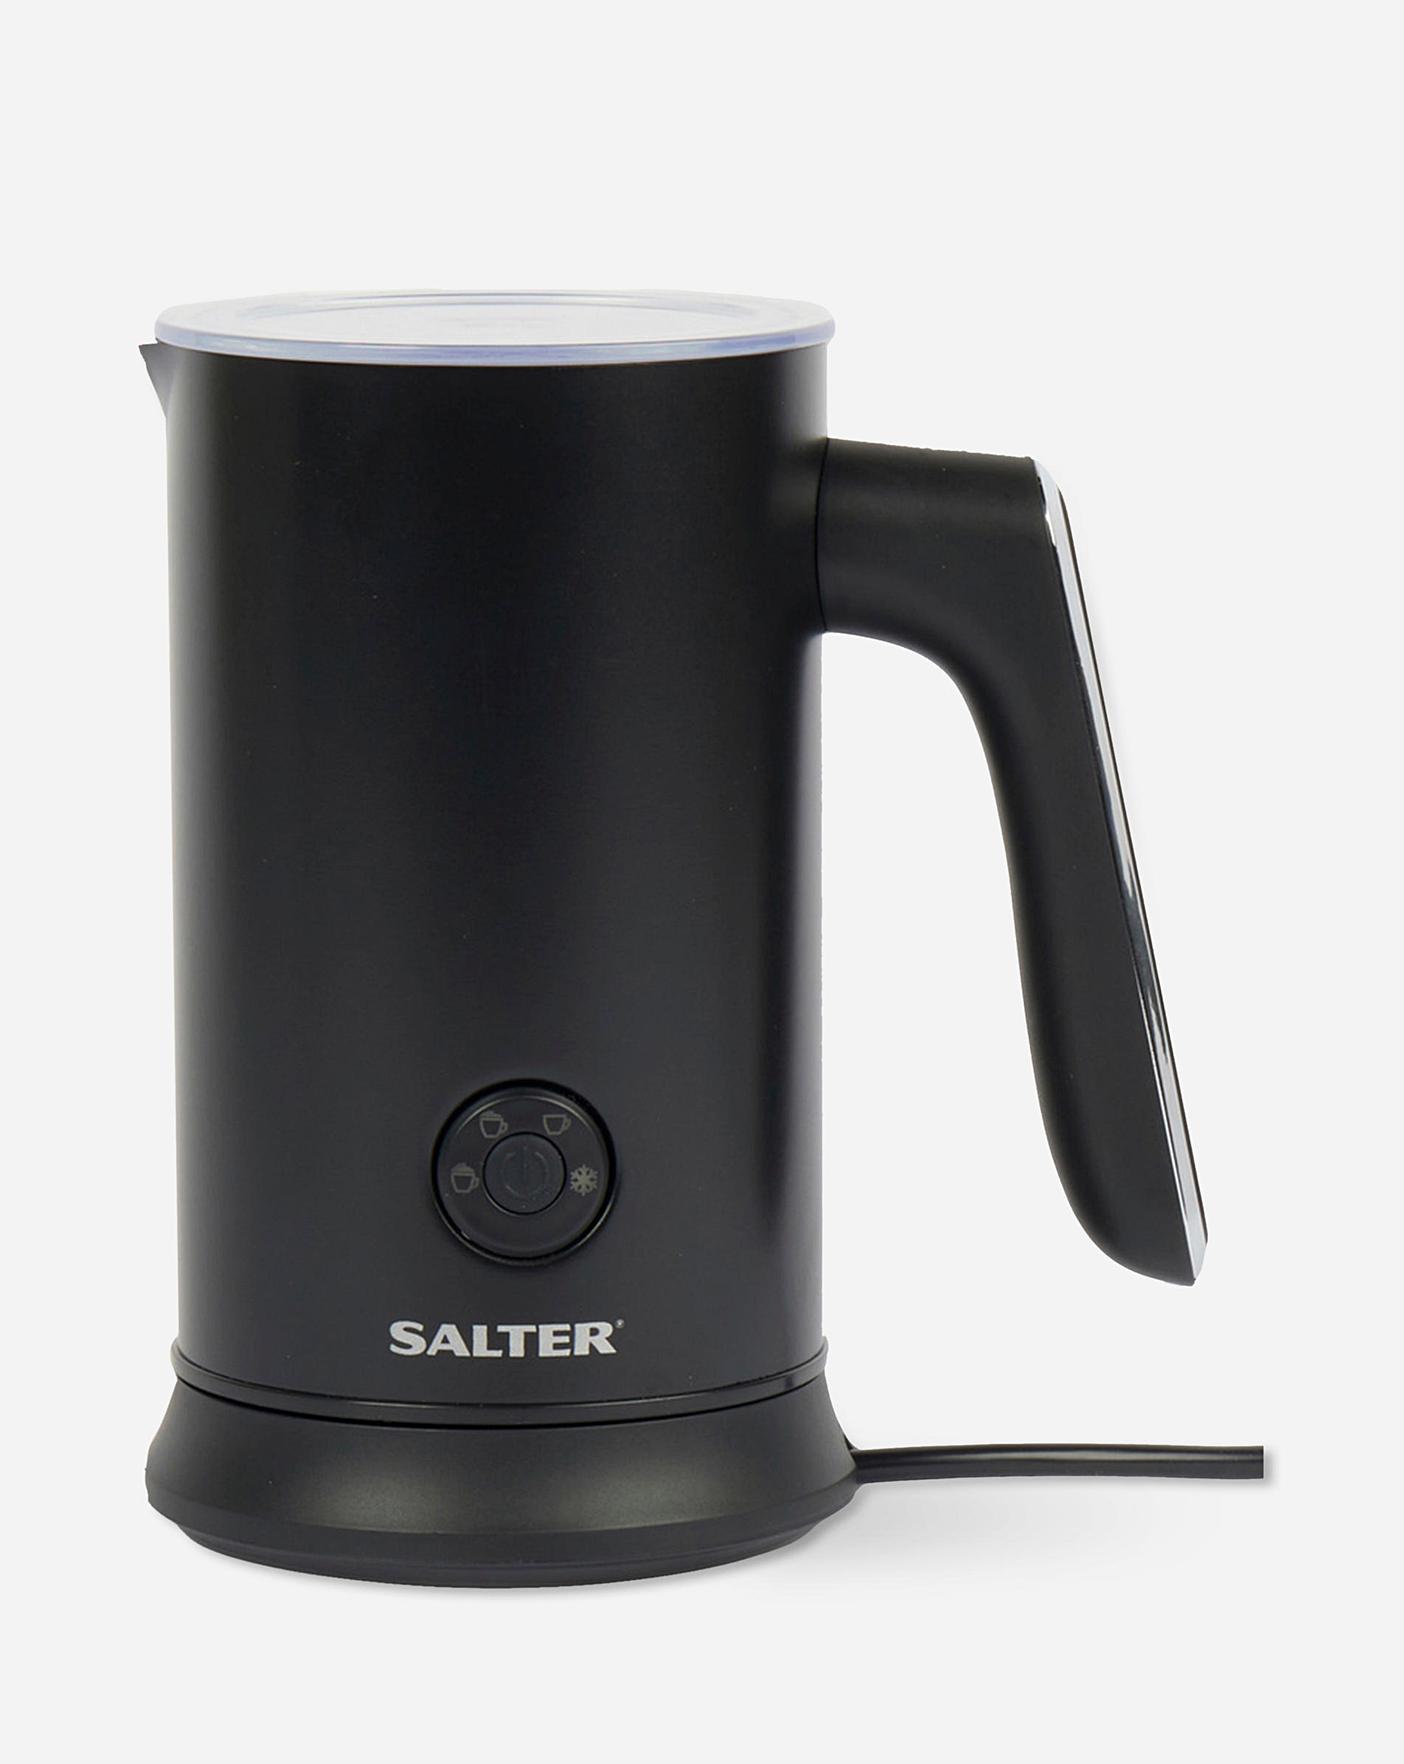 Shop Salter Electric Milk Frother, Hot/Cold Froth